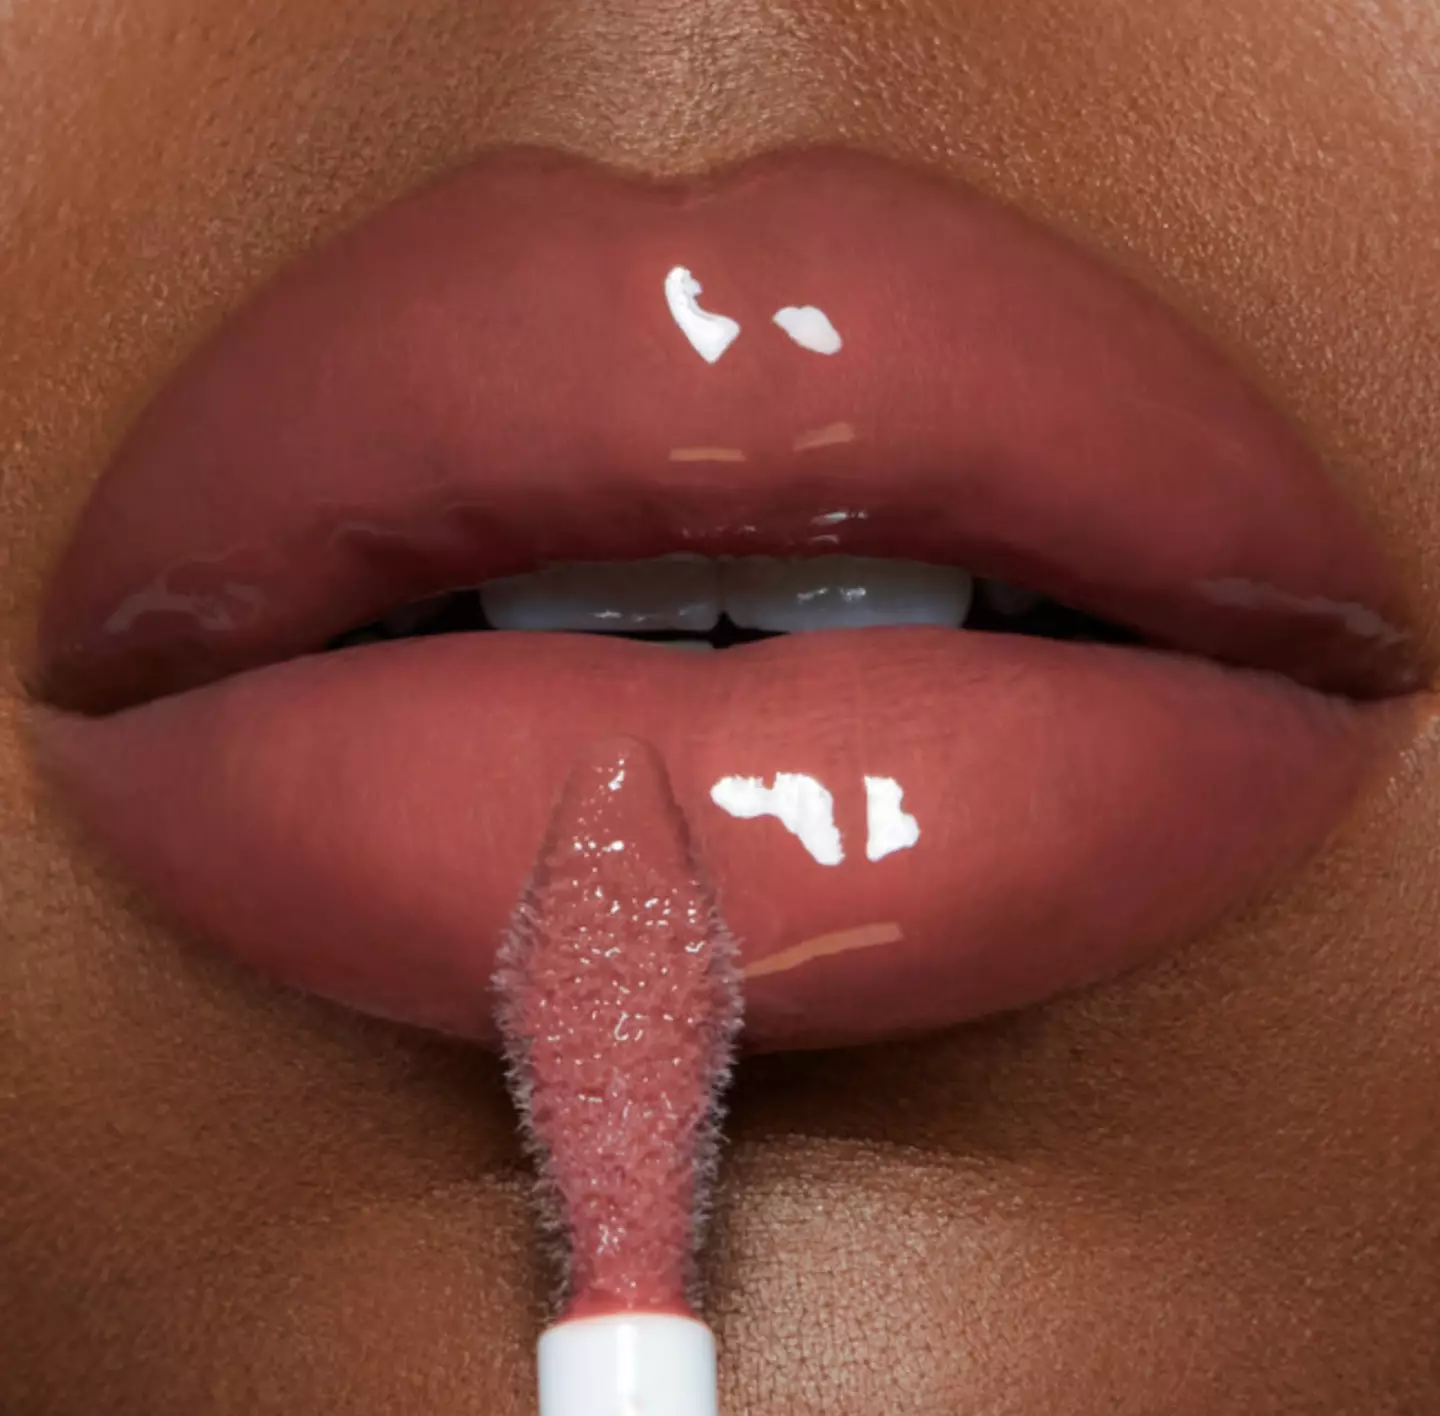 The new lipgloss claims to leave lips looking up to 93% plumper instantly.